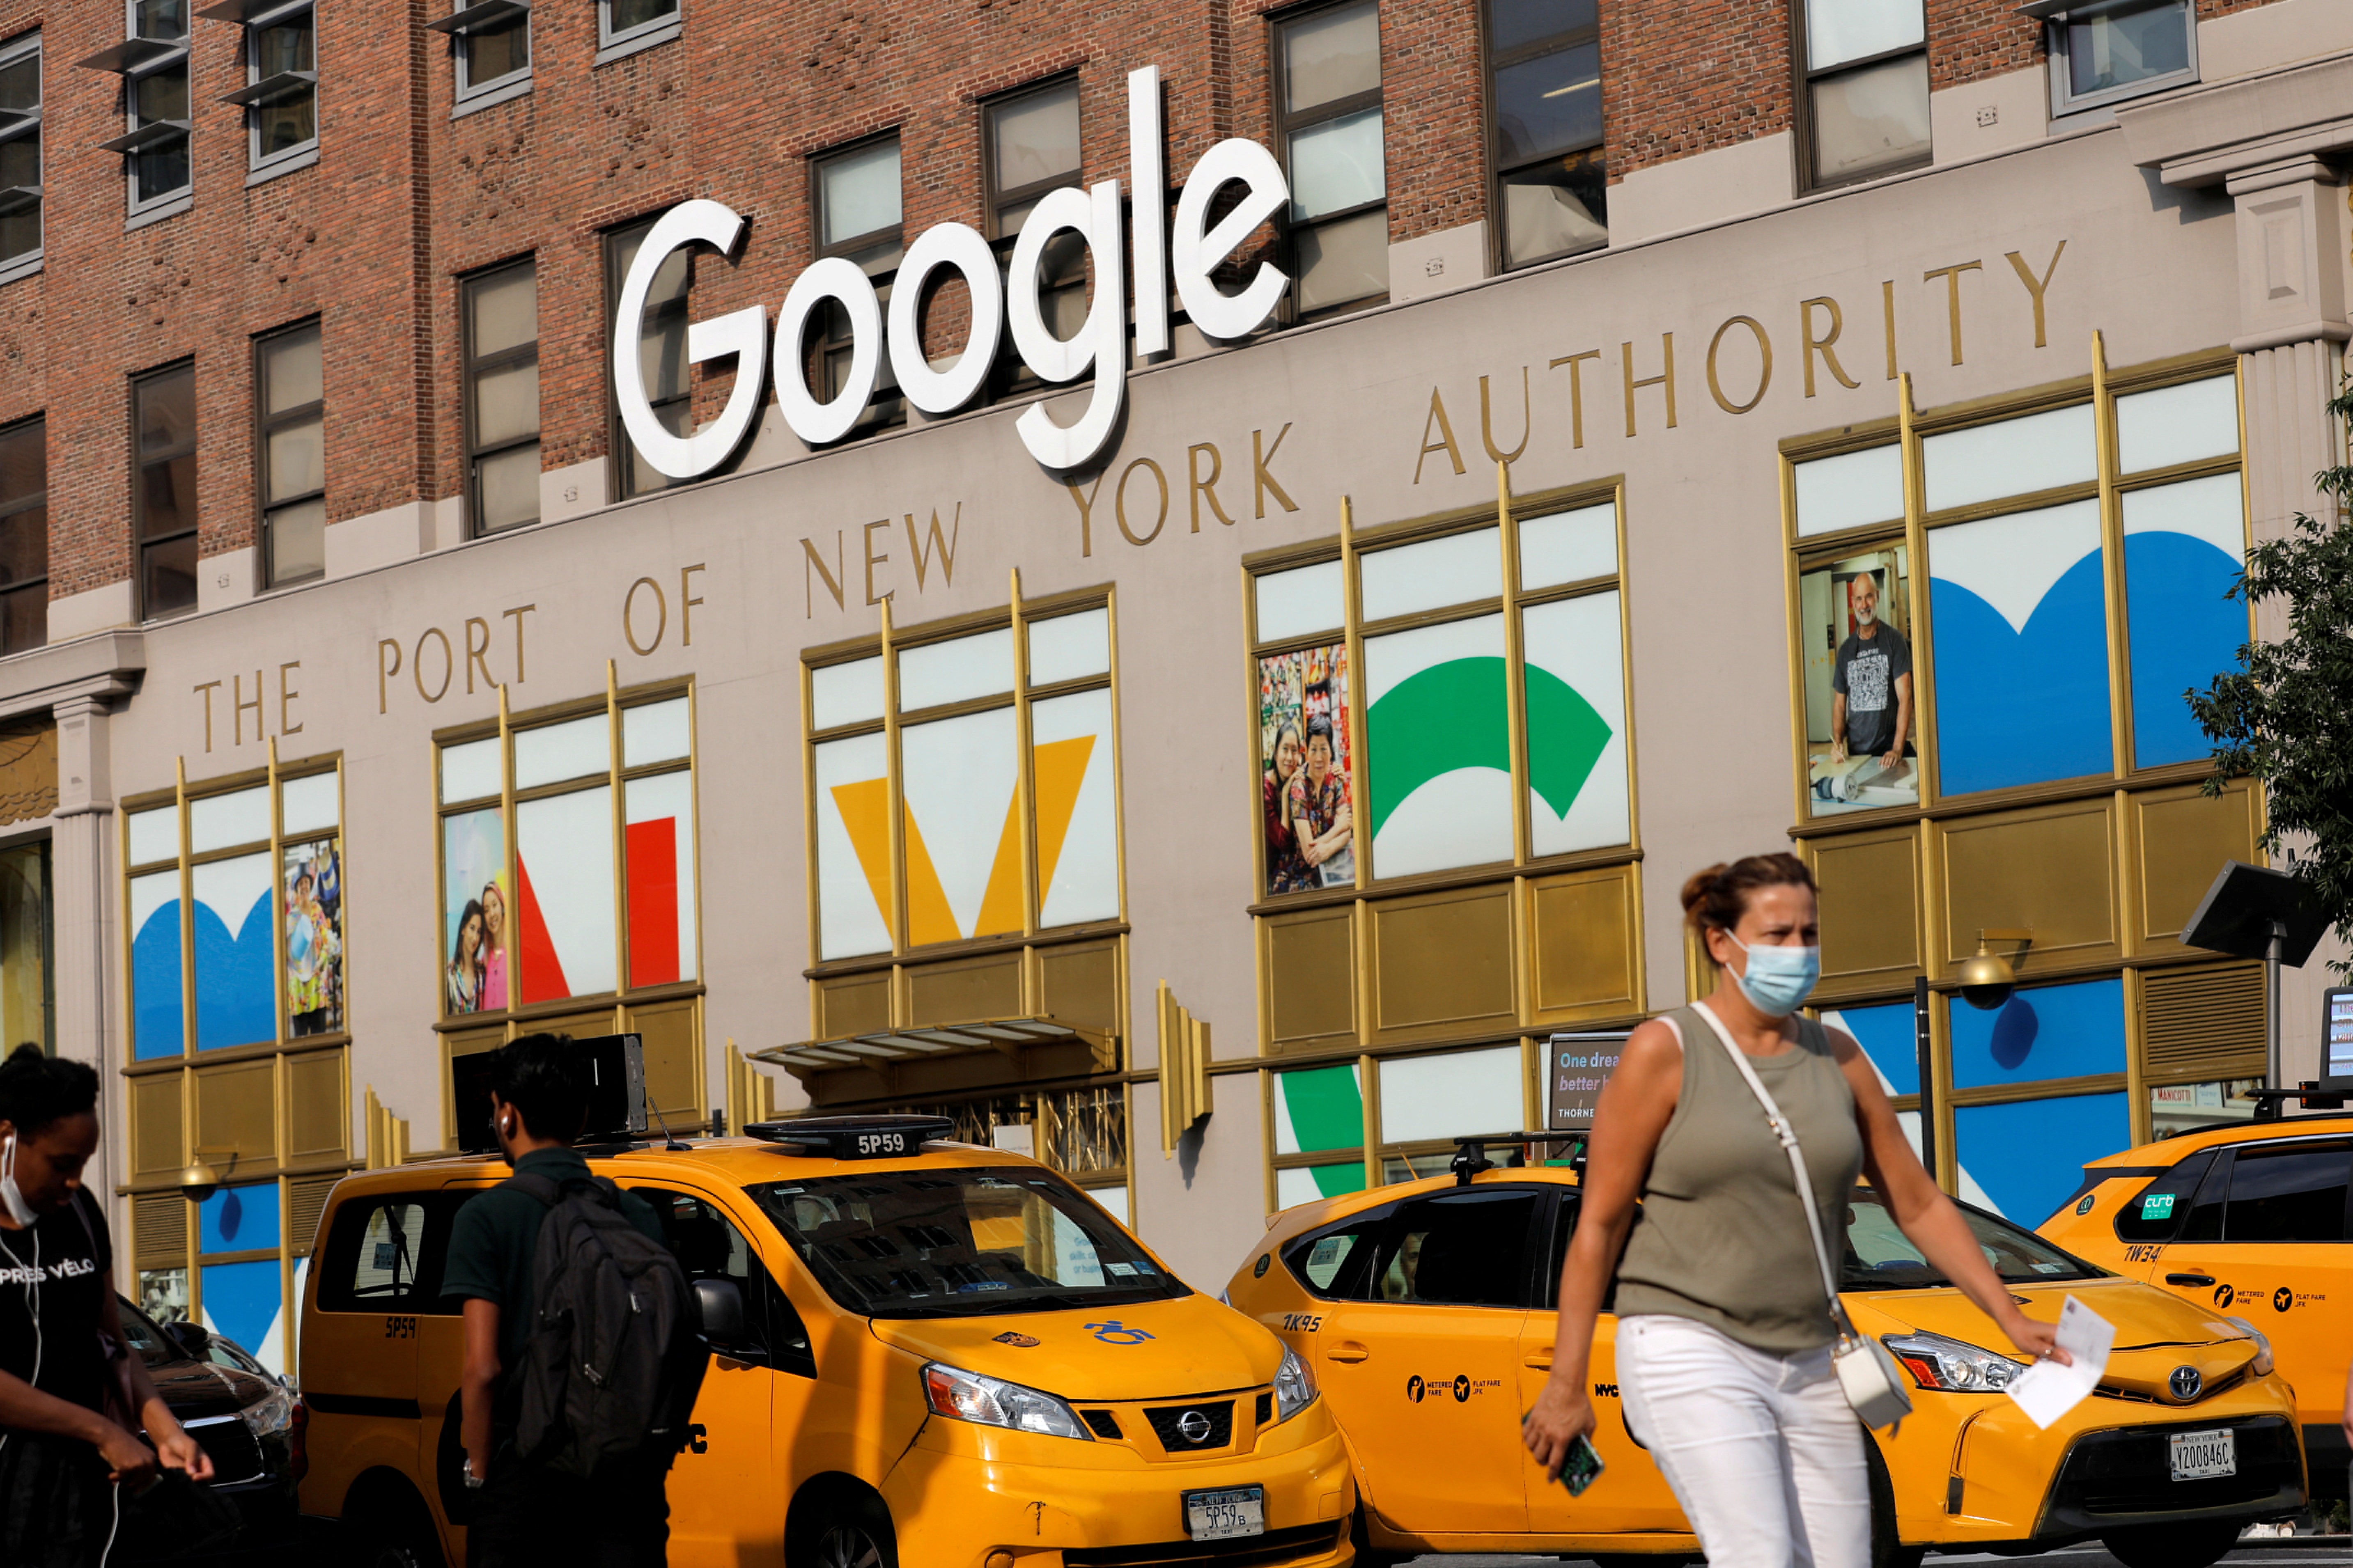 A person in a mask walks by the New York Google offices in New York City